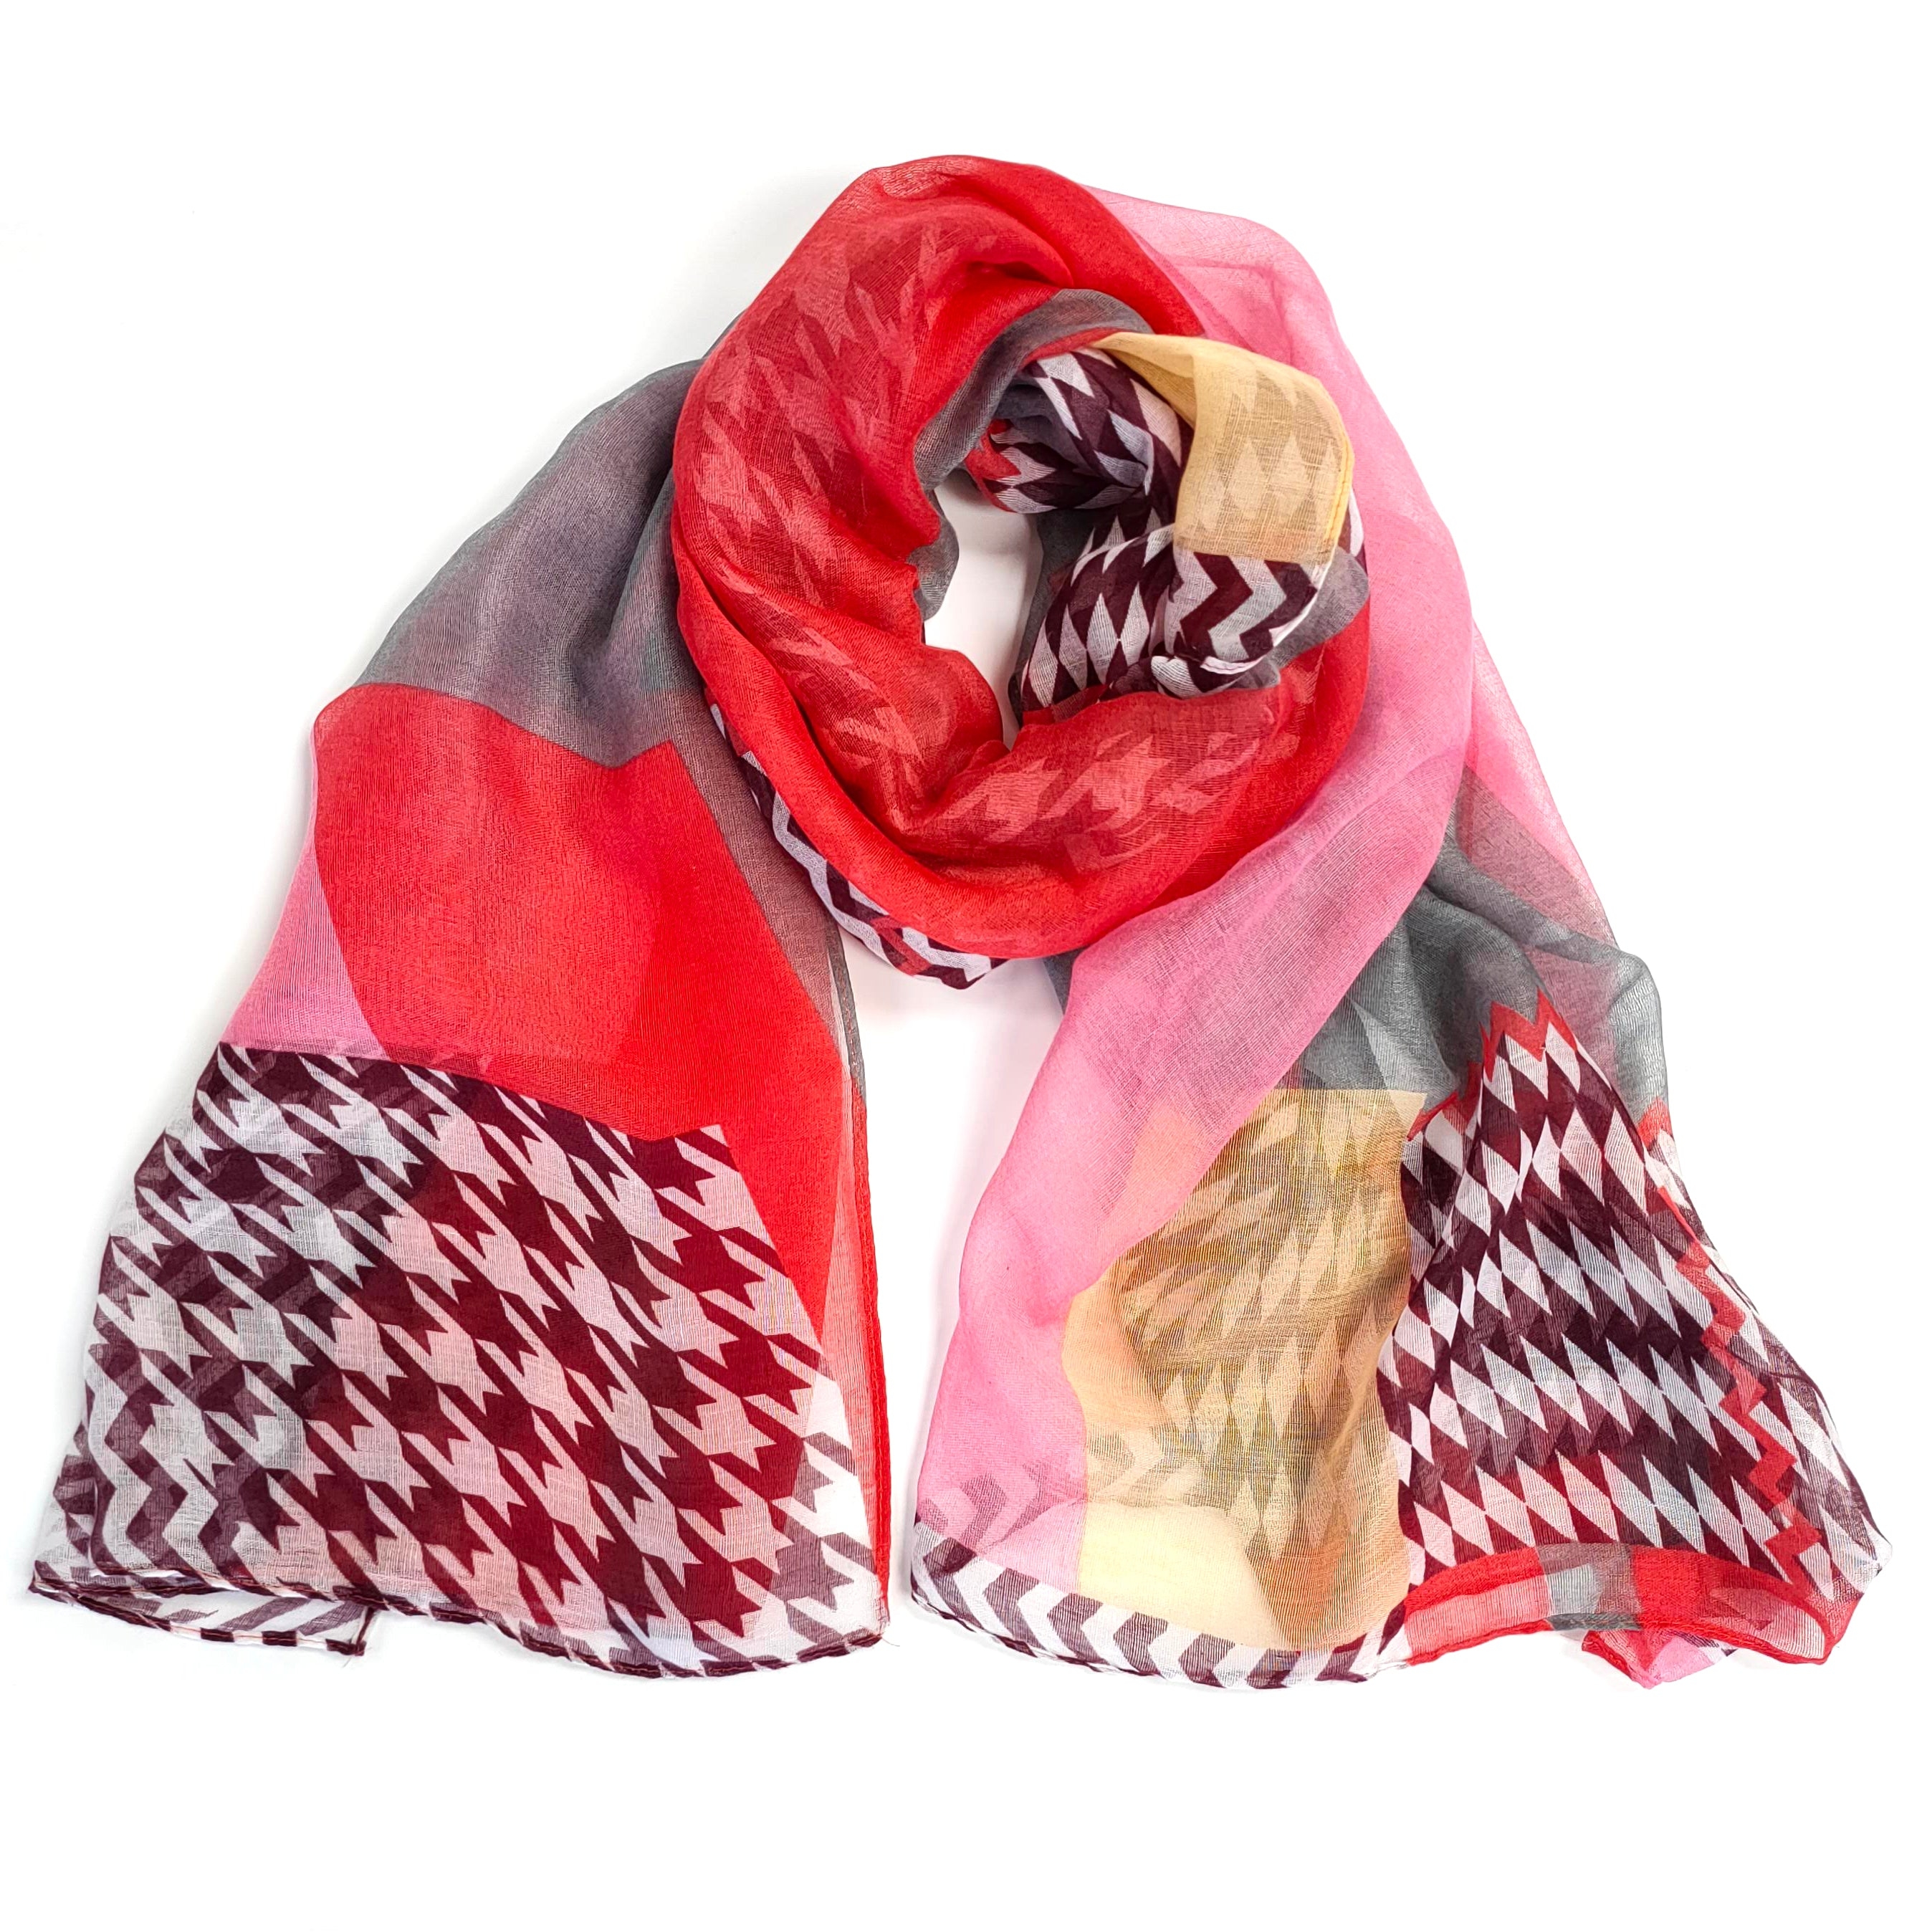 Rosthern – Dogtooth & ZigZag Scarf Red – Stylish & Luxurious – Unisex – The Scarf Giraffe